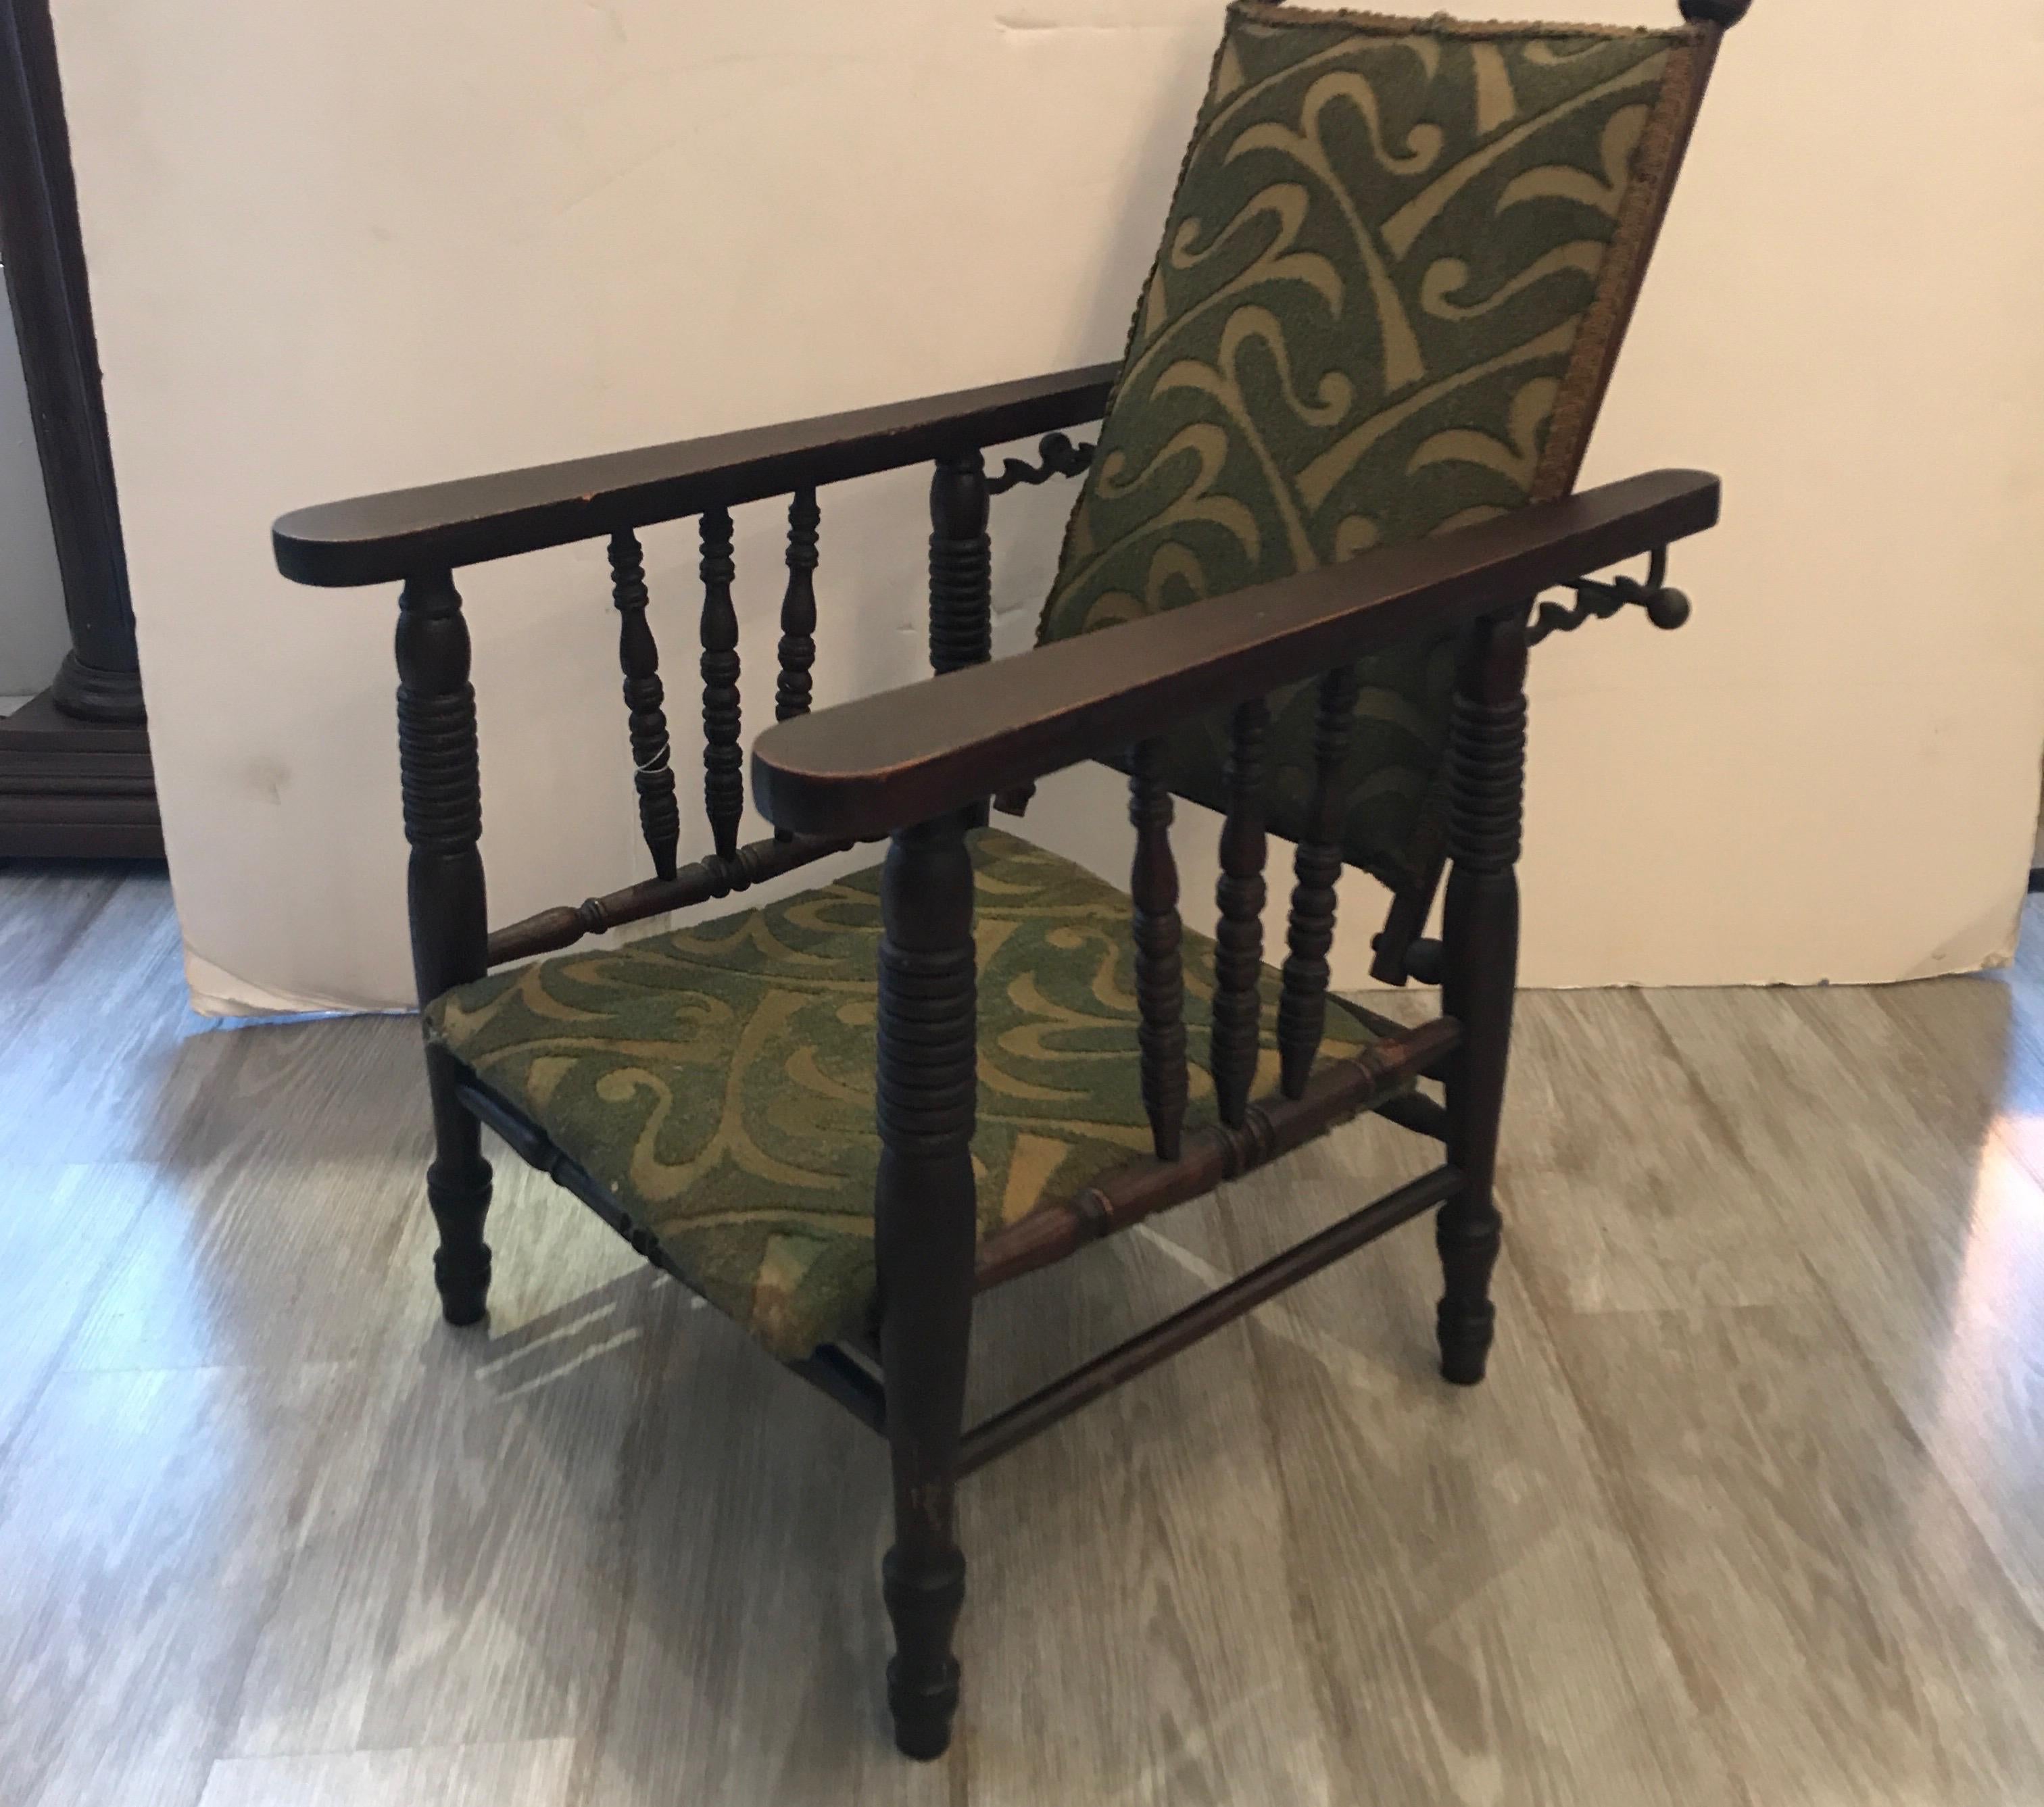 An unusual 19th century relining dark oak Childs chair. American, circa 1880. The back with an iron bar that allows the back to recline in an adjustable position. The original fabric is left on but will need recovering.